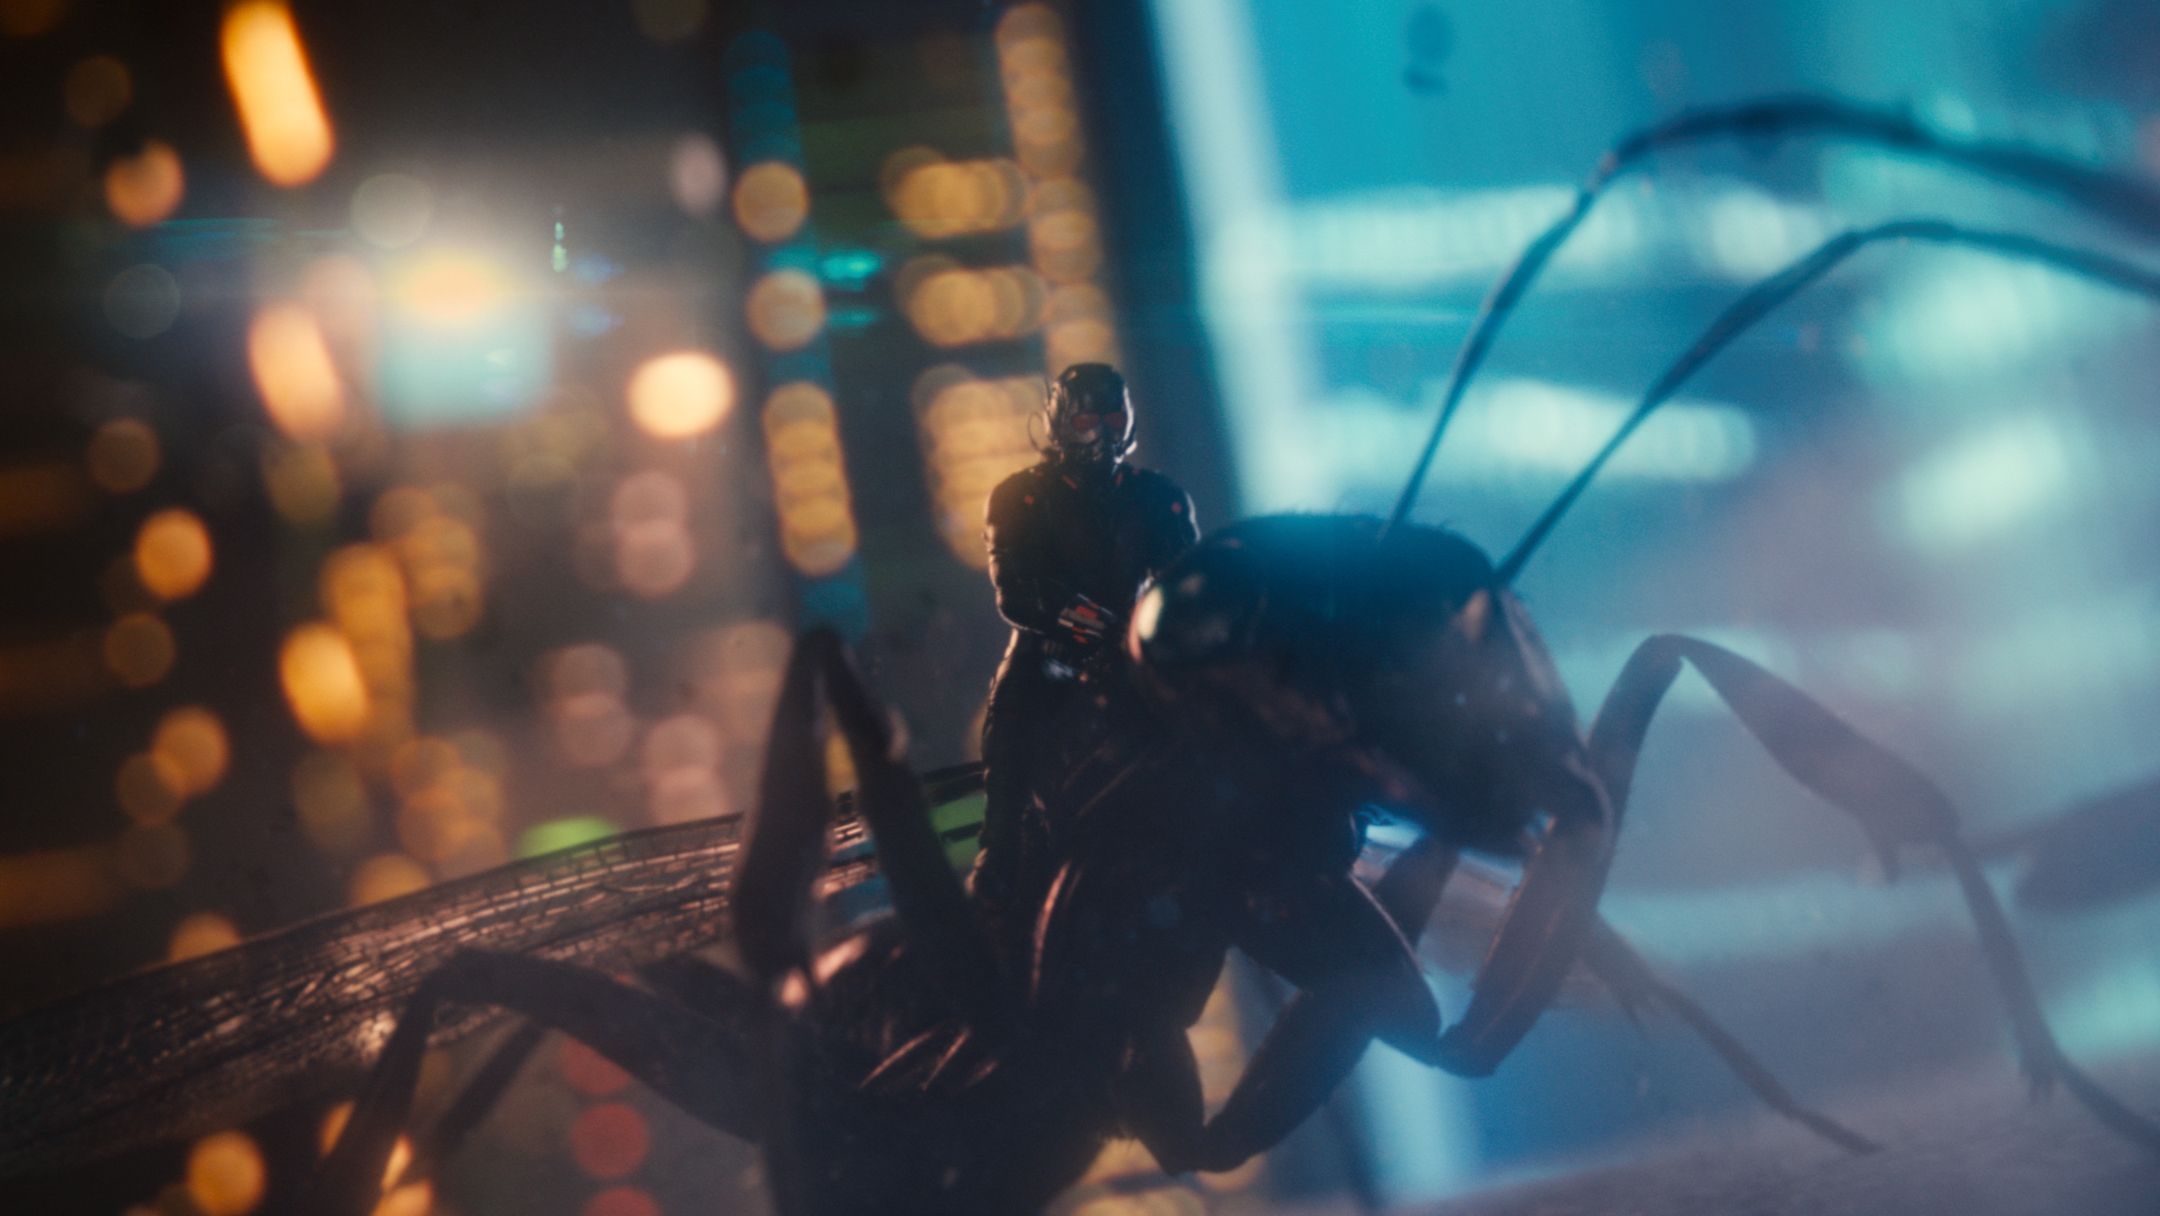 Ant-Man Images and Concept Art Featuring Paul Rudd | Collider